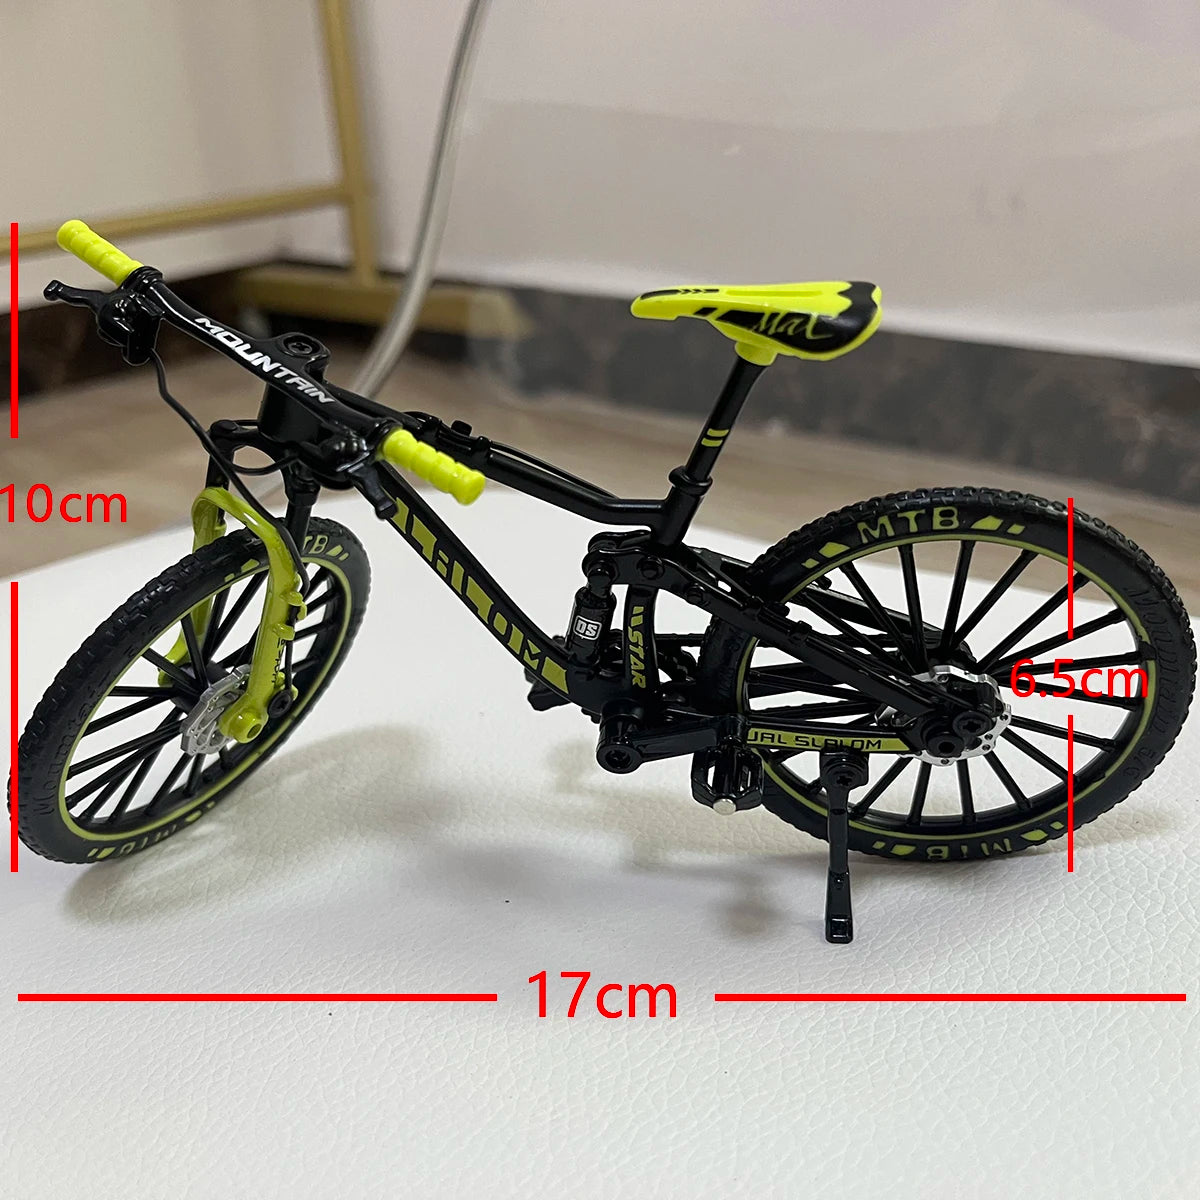 1:10 Mini Model Alloy Biycle Diecast Mountain Finger Racing Green Bike Adult Simulation Collection Gifts Toys Ornaments for boys